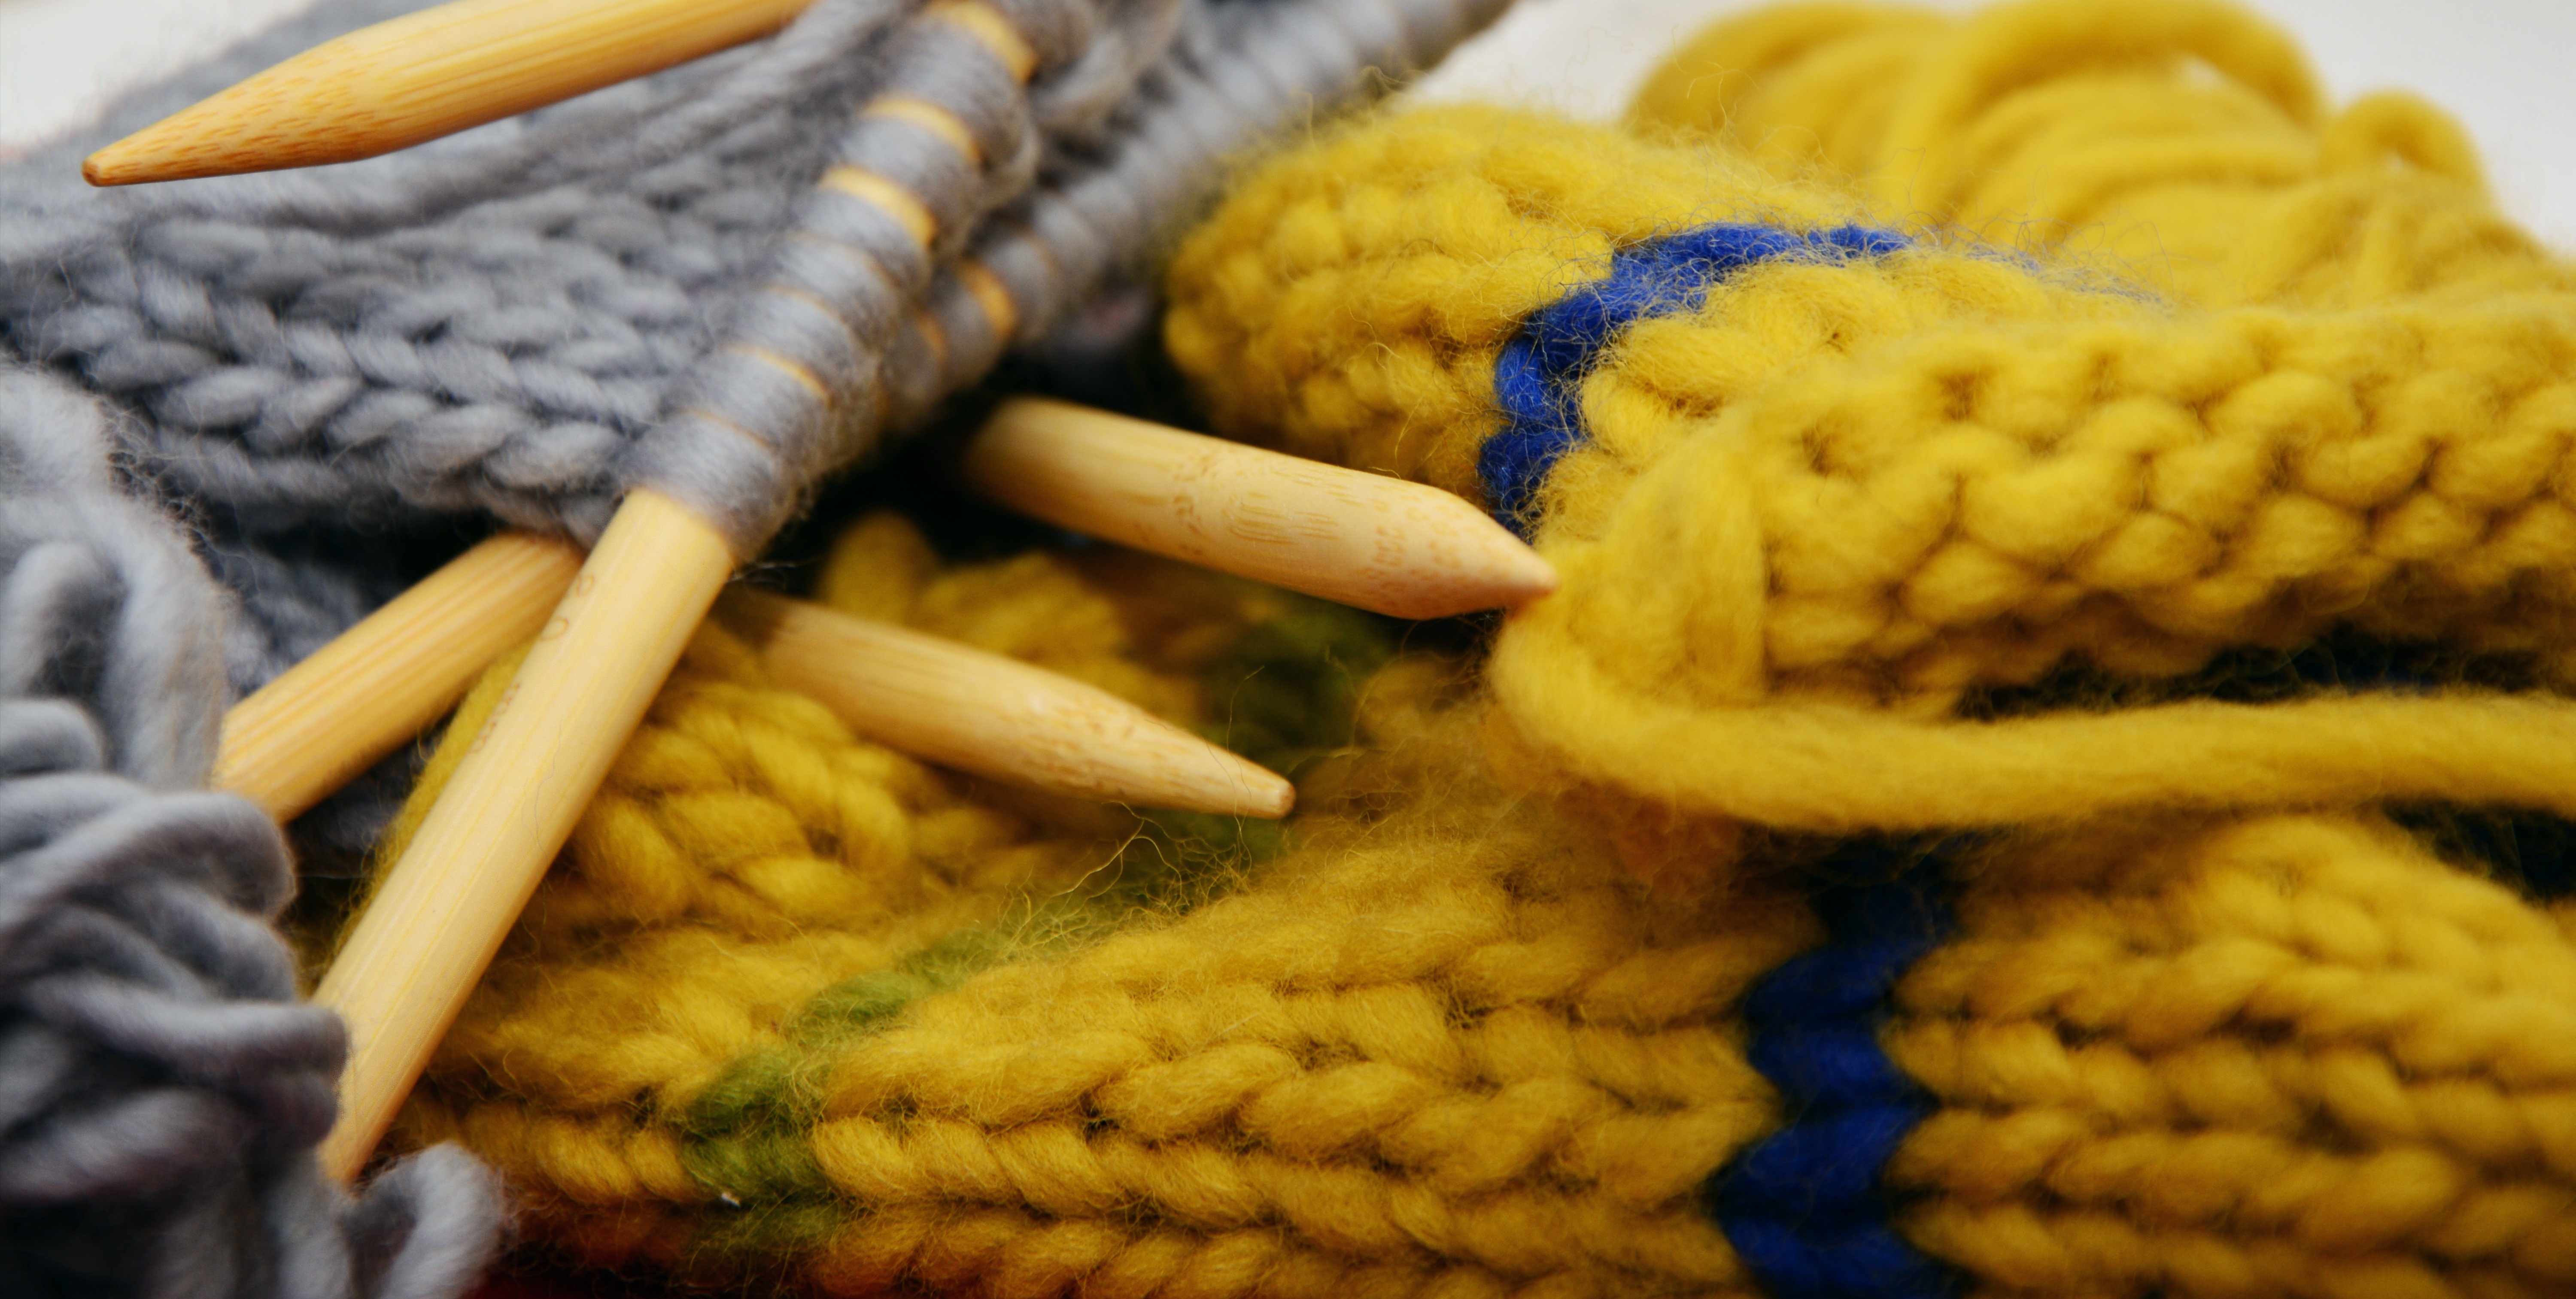 What kind of knitting project would you pack for your travel?